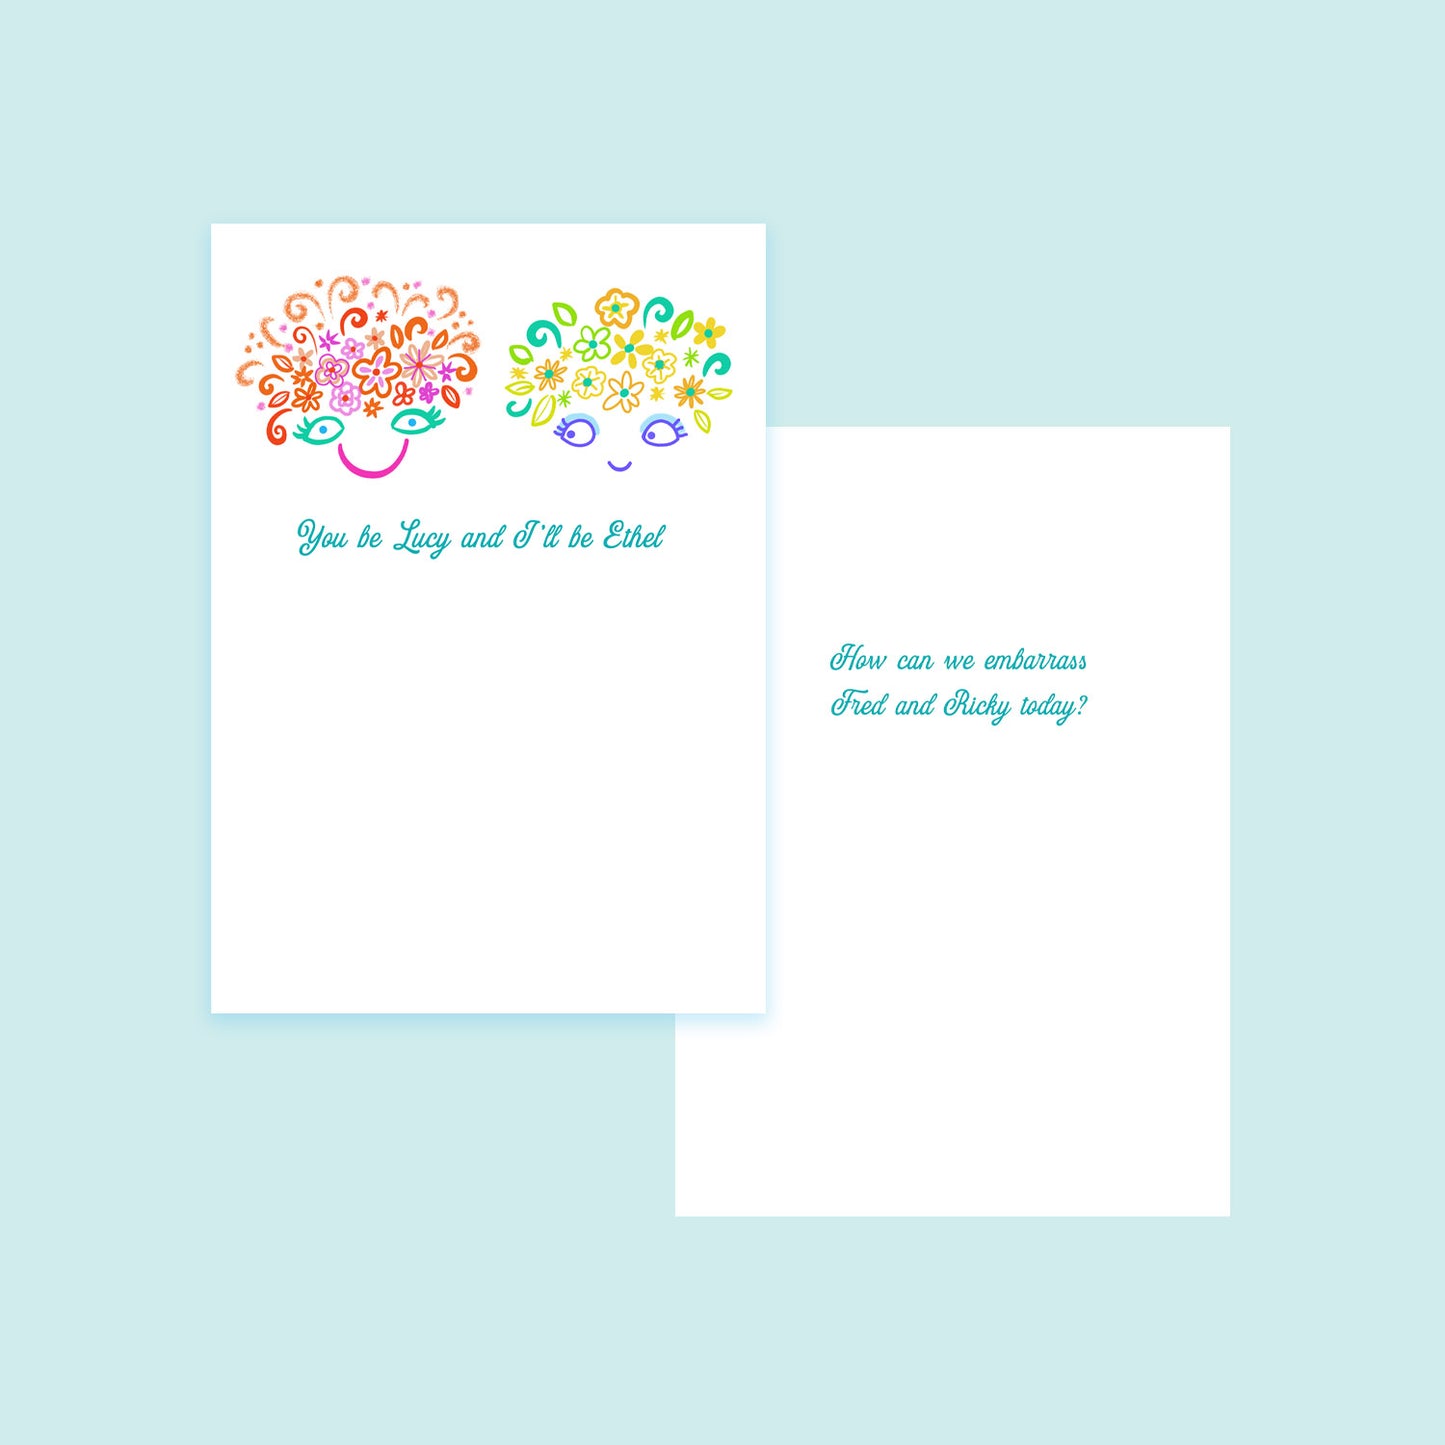 Lucy & Ethel Greeting Card